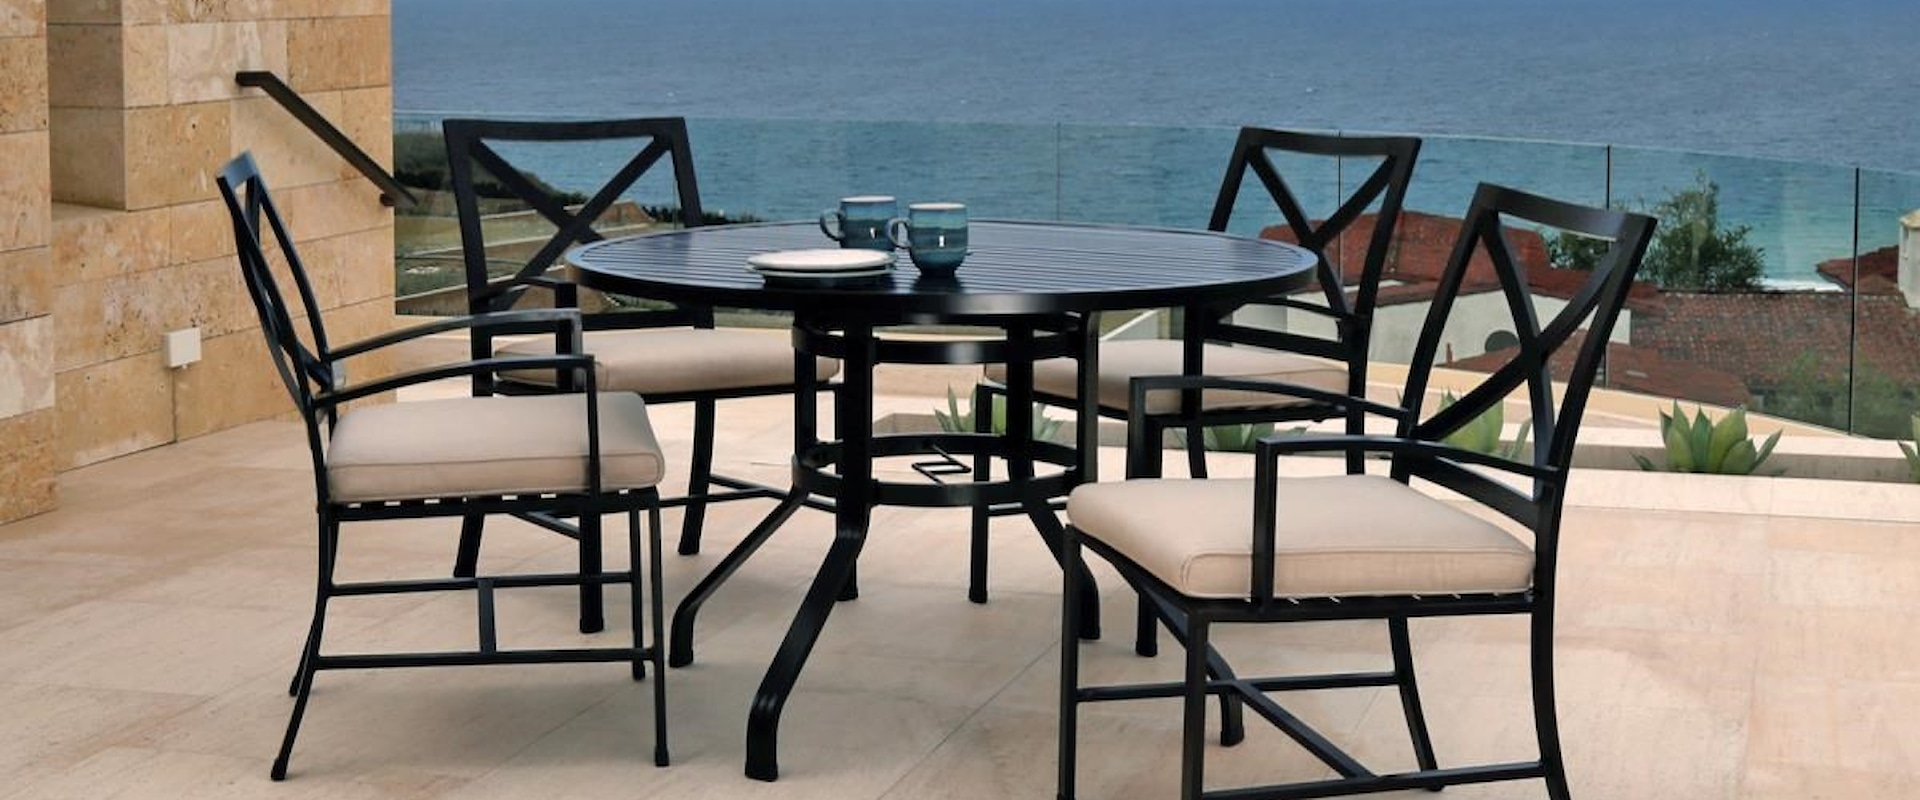 5 Piece Outdoor Dining Set with a Round Outdoor Dining Table and 4 Outdoor Dining Chairs